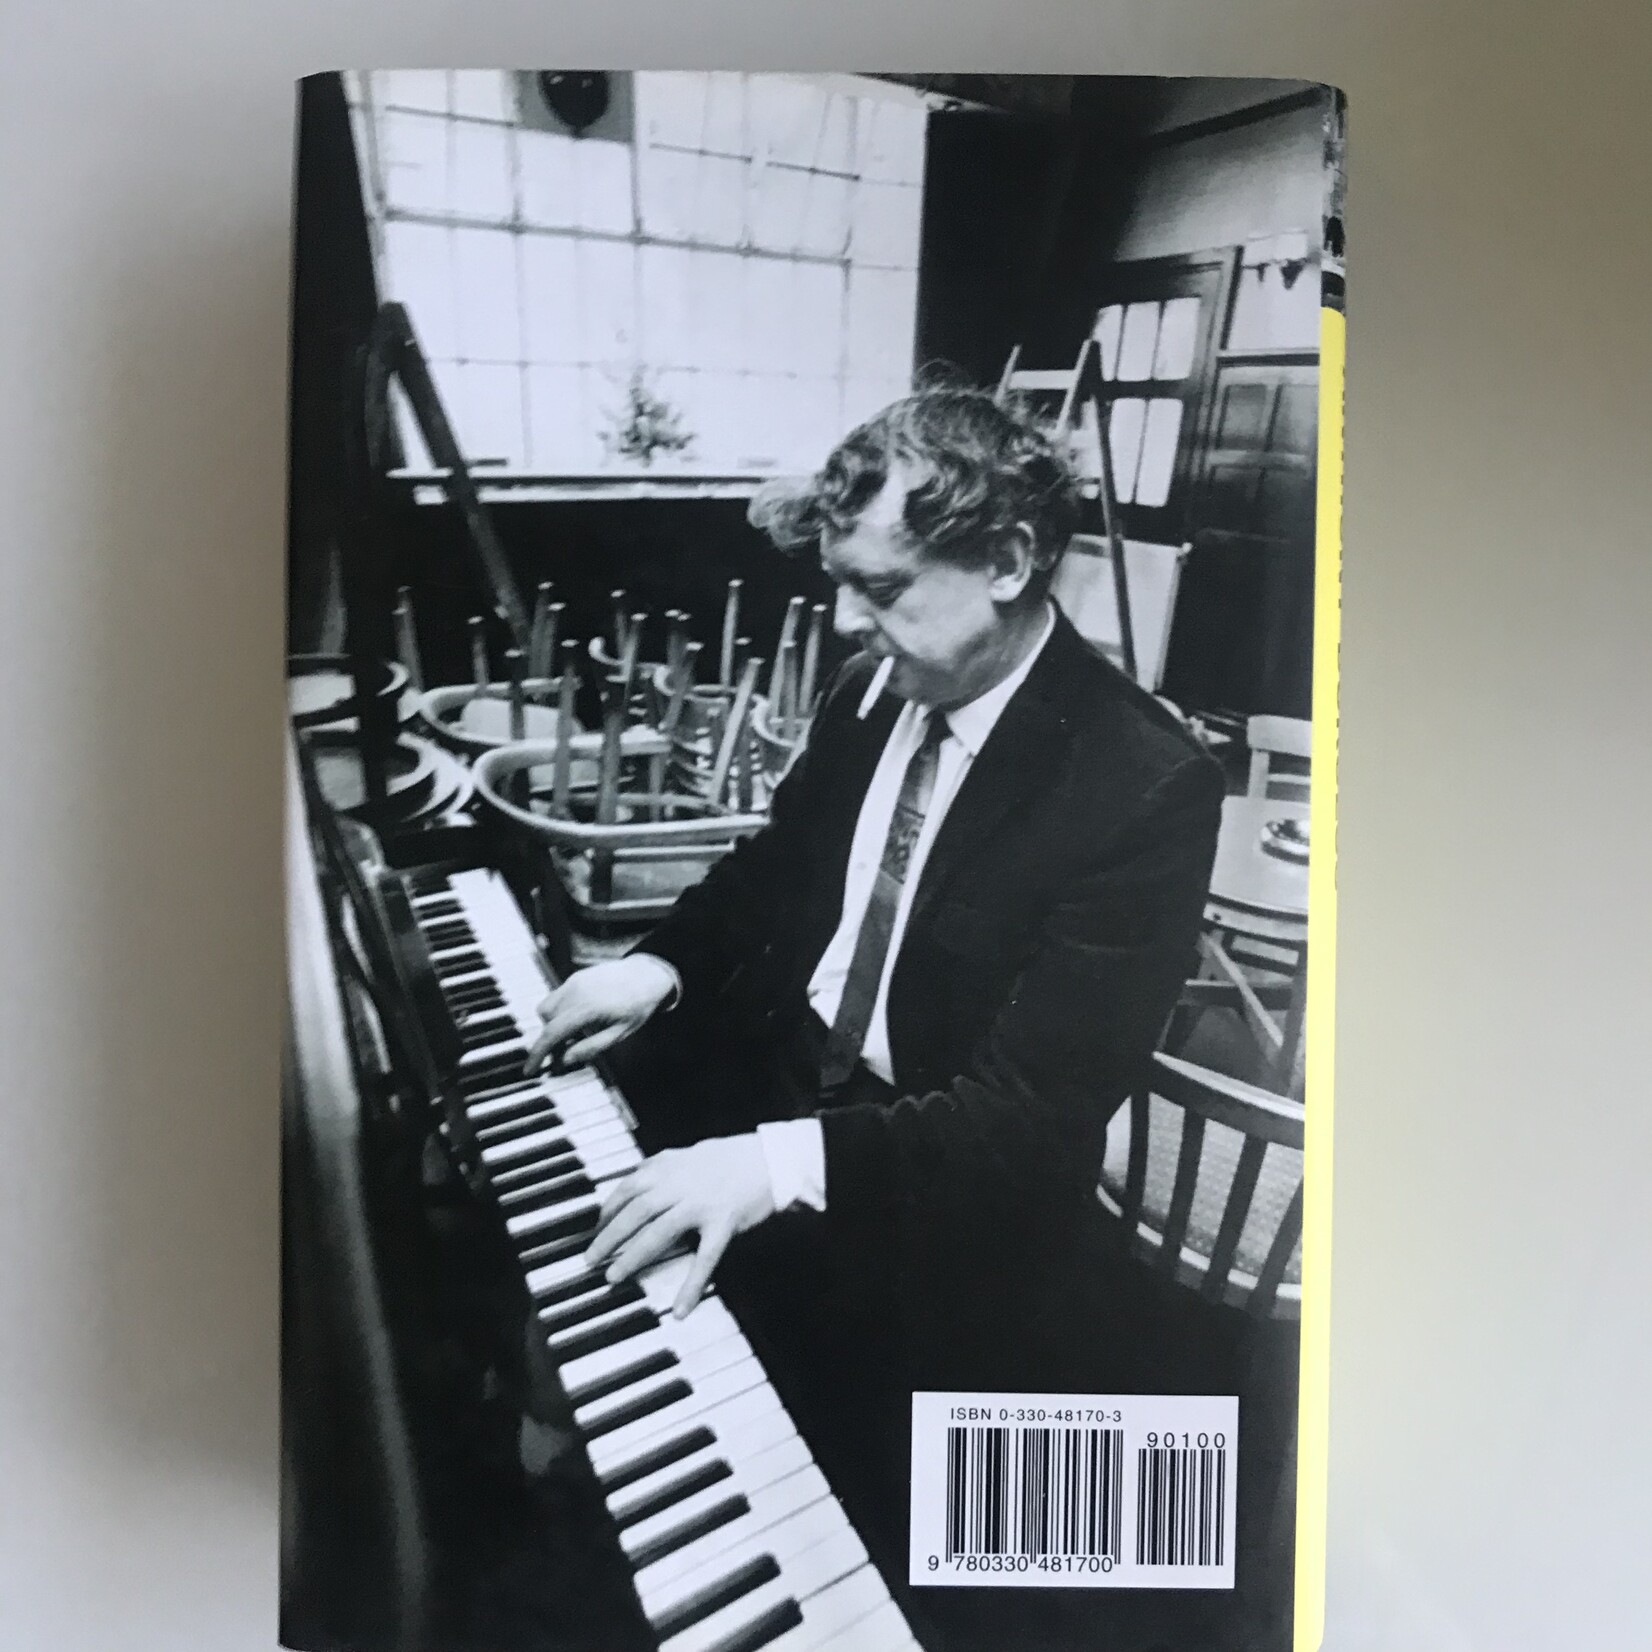 Andrew Biswell - The Real Life Of Anthony Burgess - Hardback (USED)